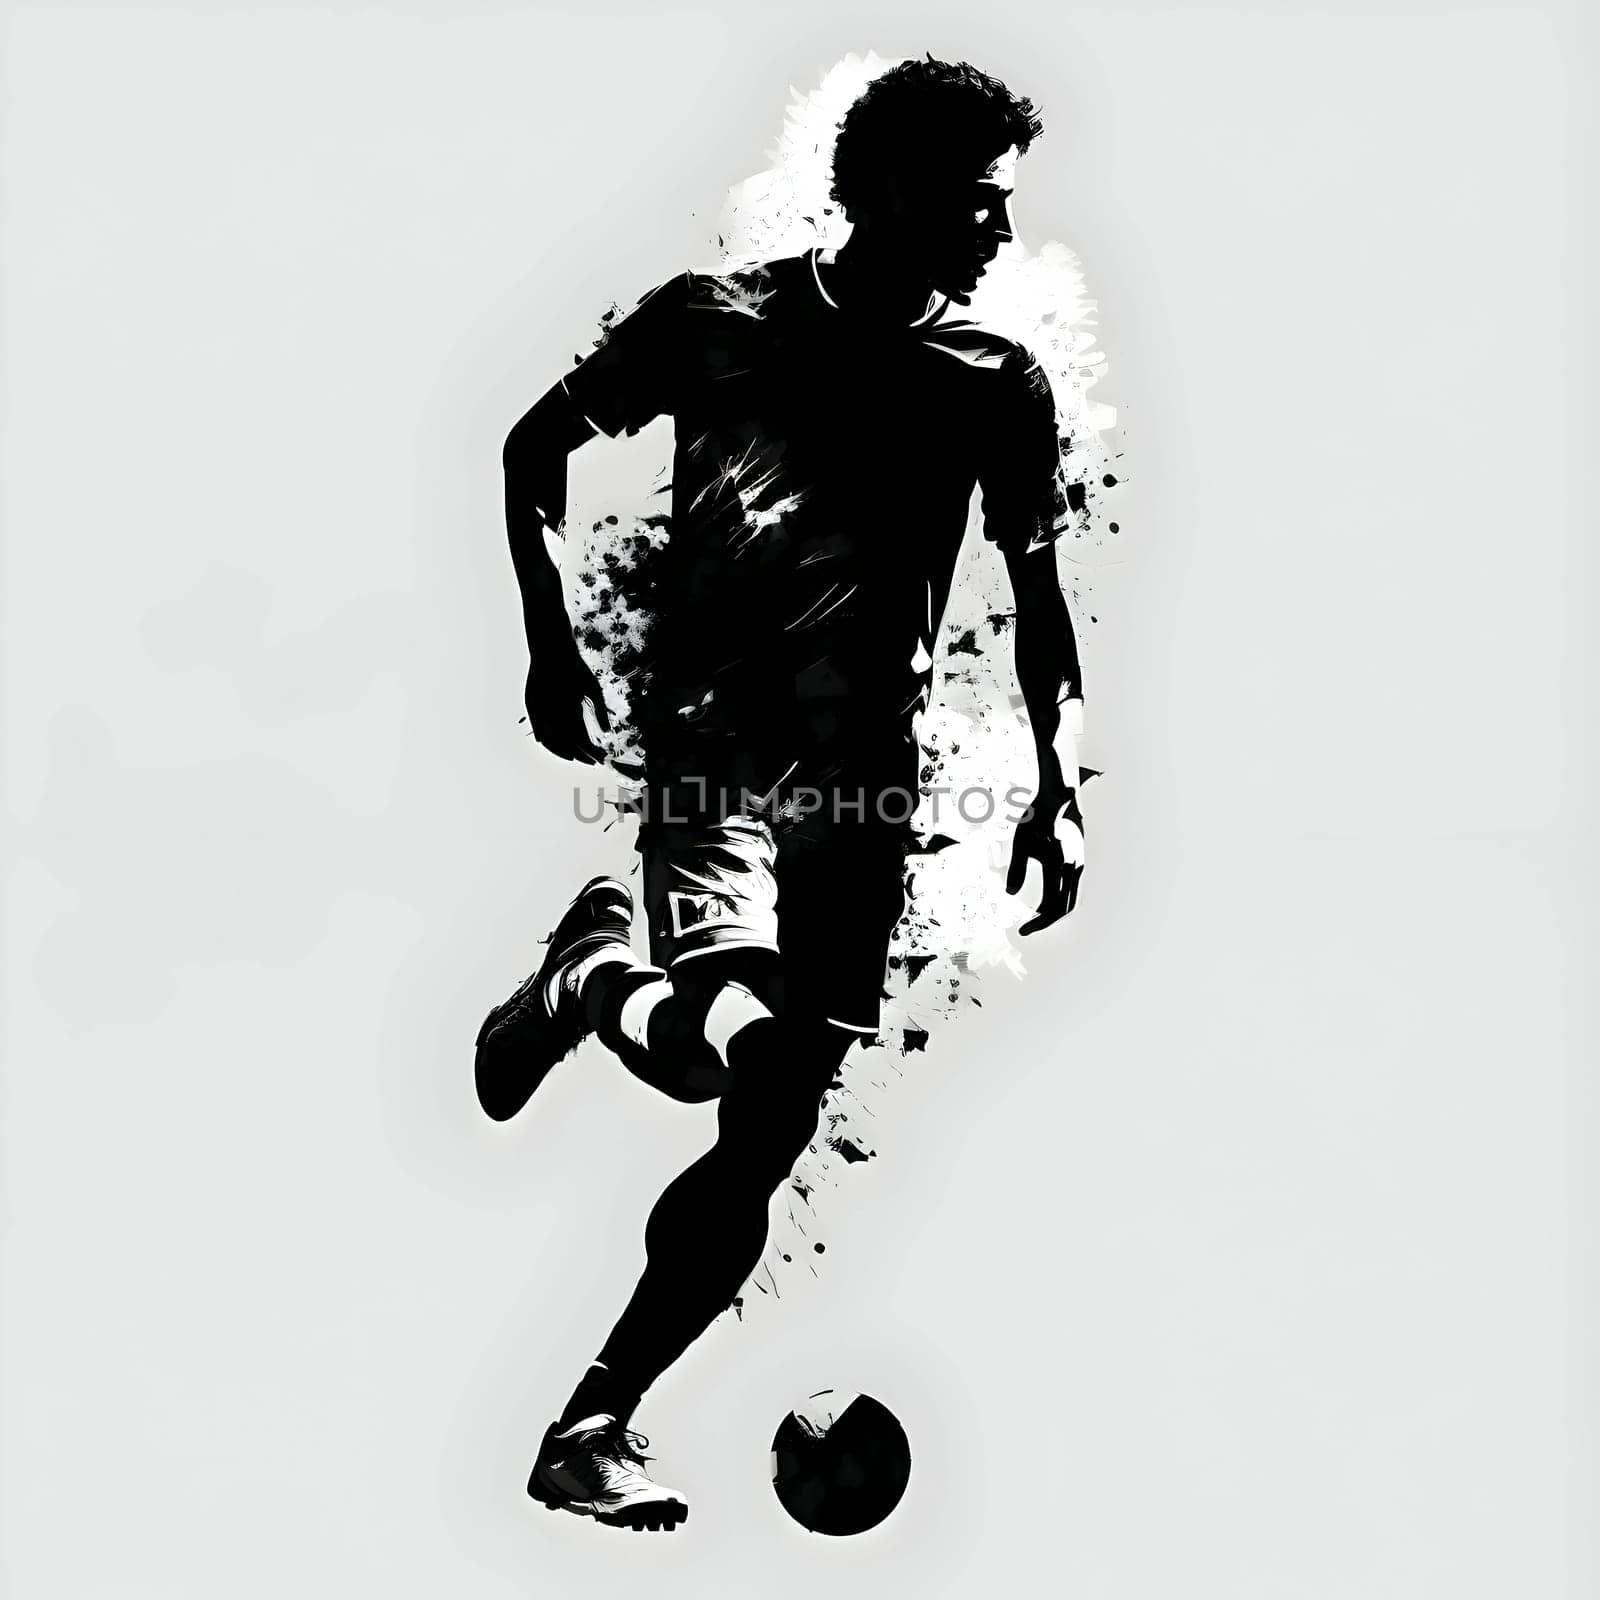 Vector illustration of a football player in black silhouette against a clean white background, capturing graceful forms.